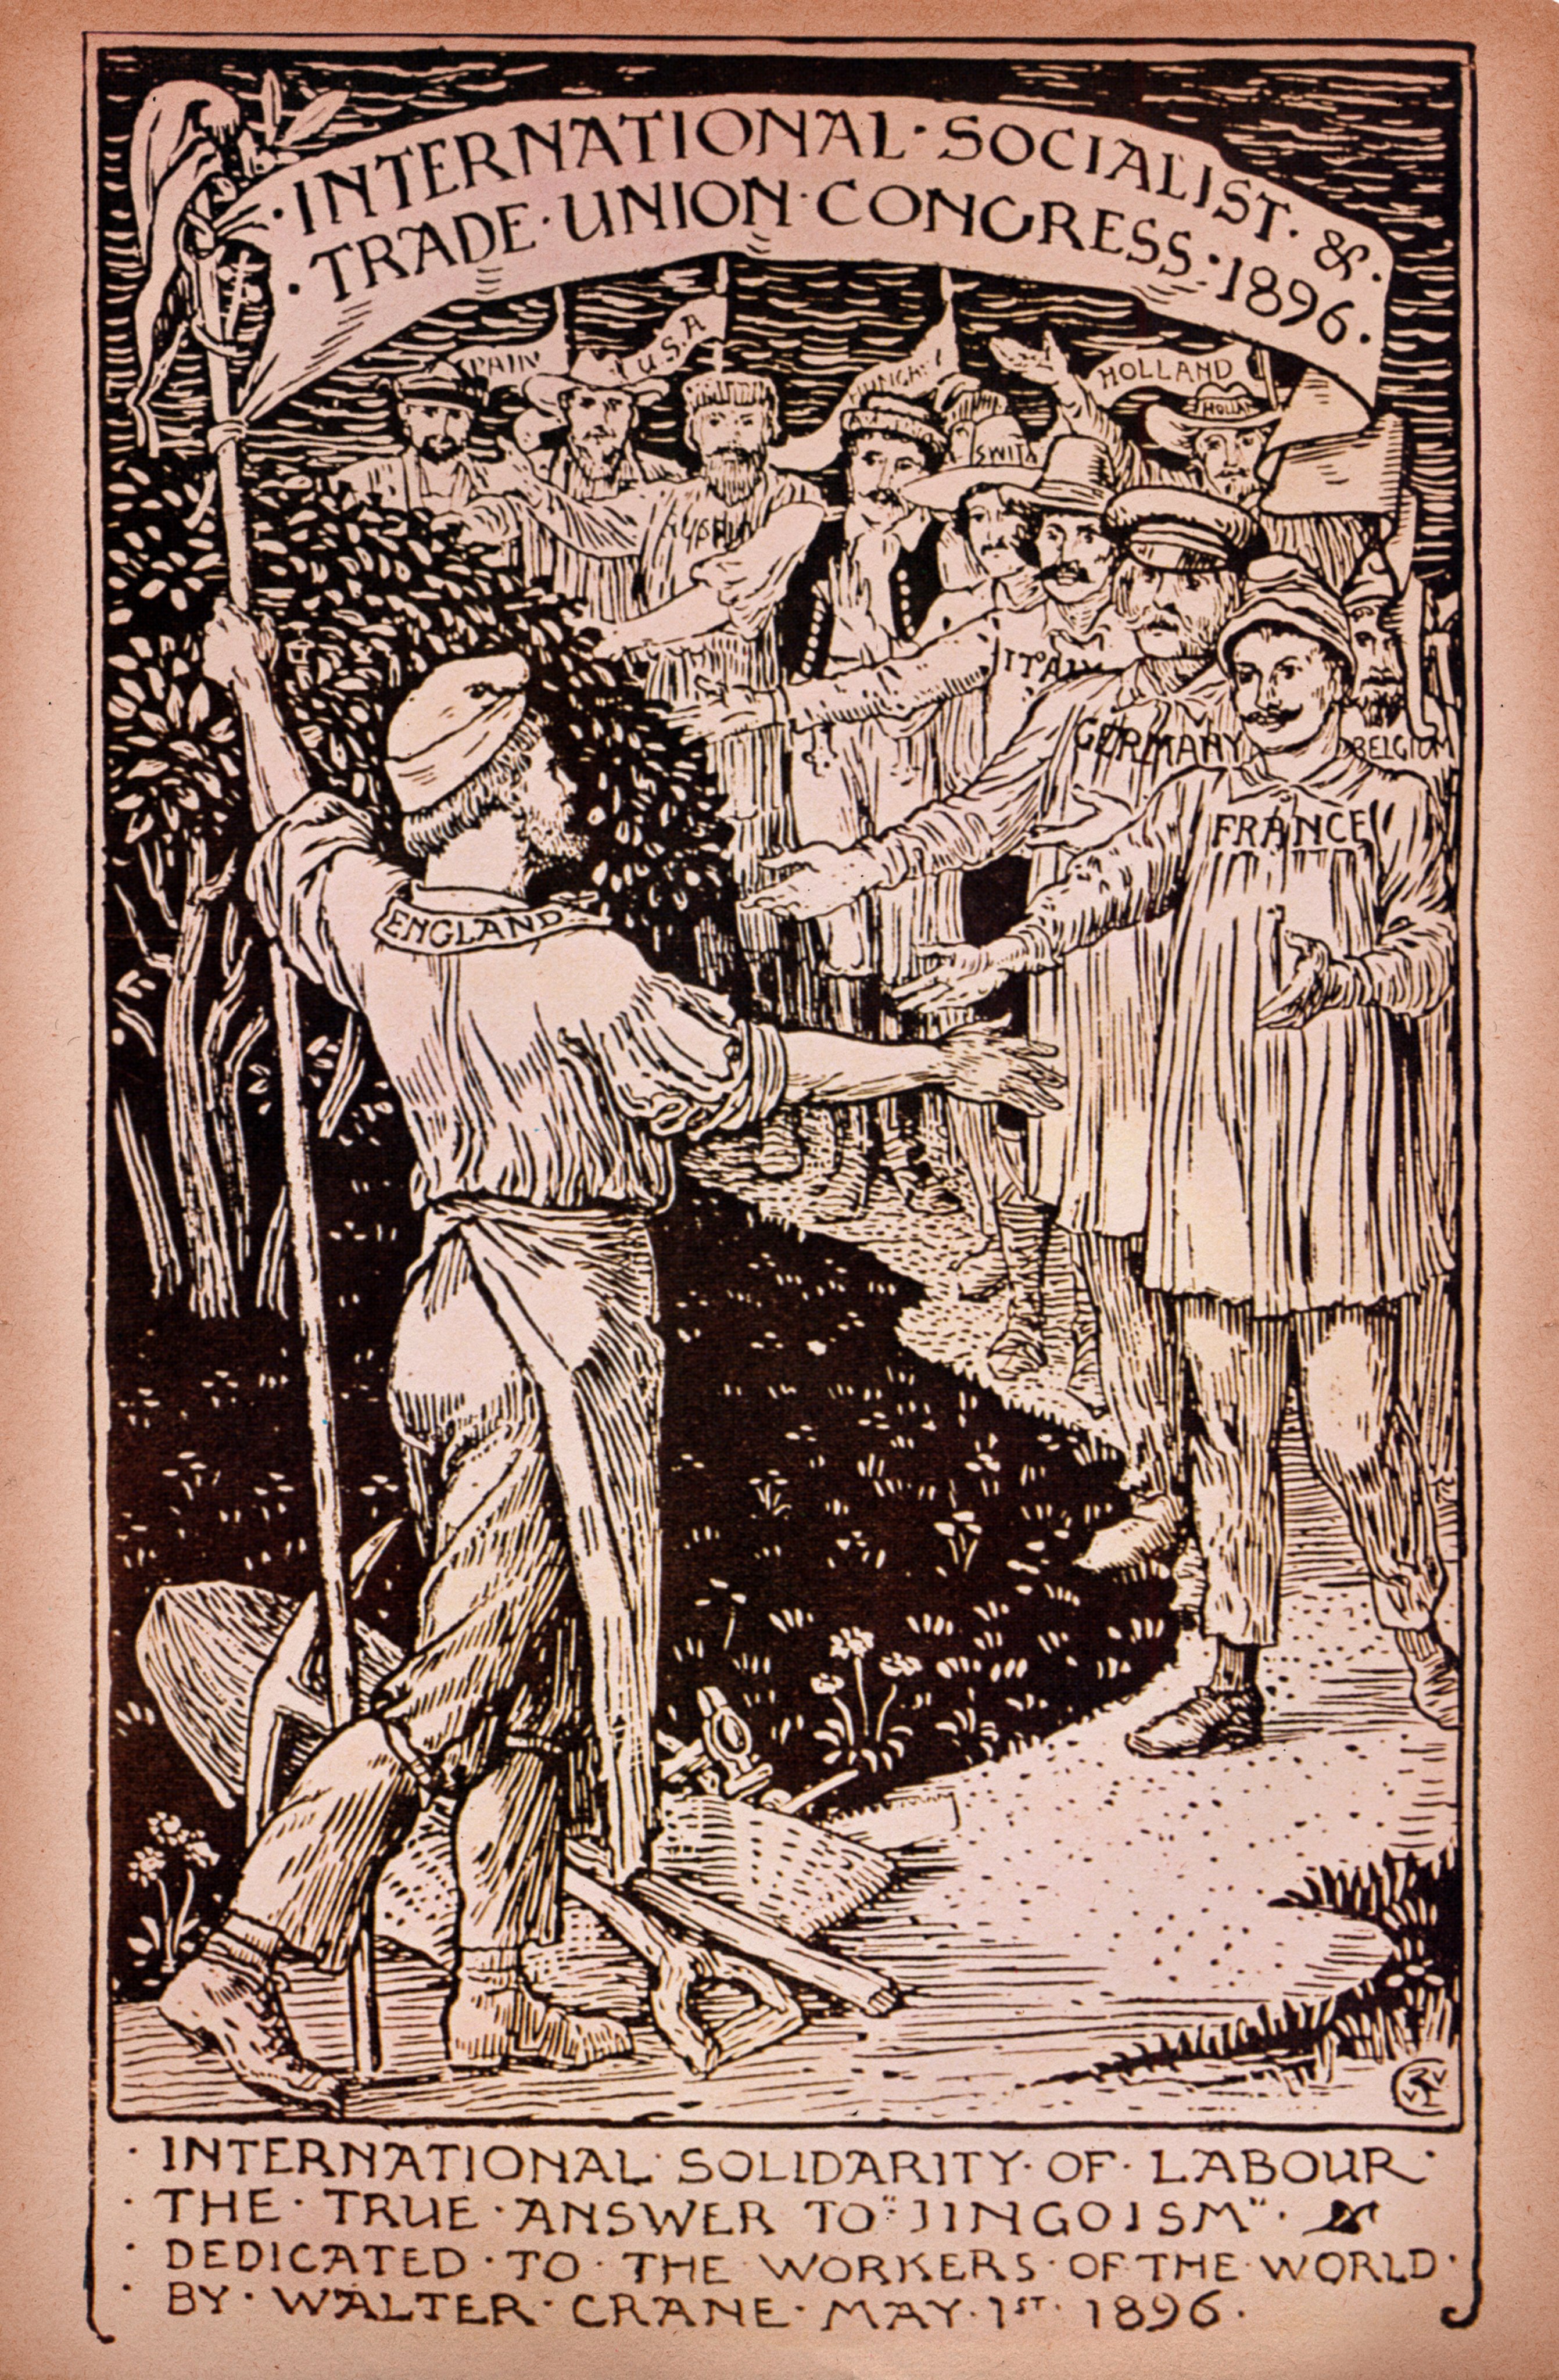 A poster by Walter Crane for the International Socialist Trade Union Congress 1896. Labour movements arose in 19th century Europe and North America, two centuries after organised labour emerged in imperial China. Photo: Getty Images